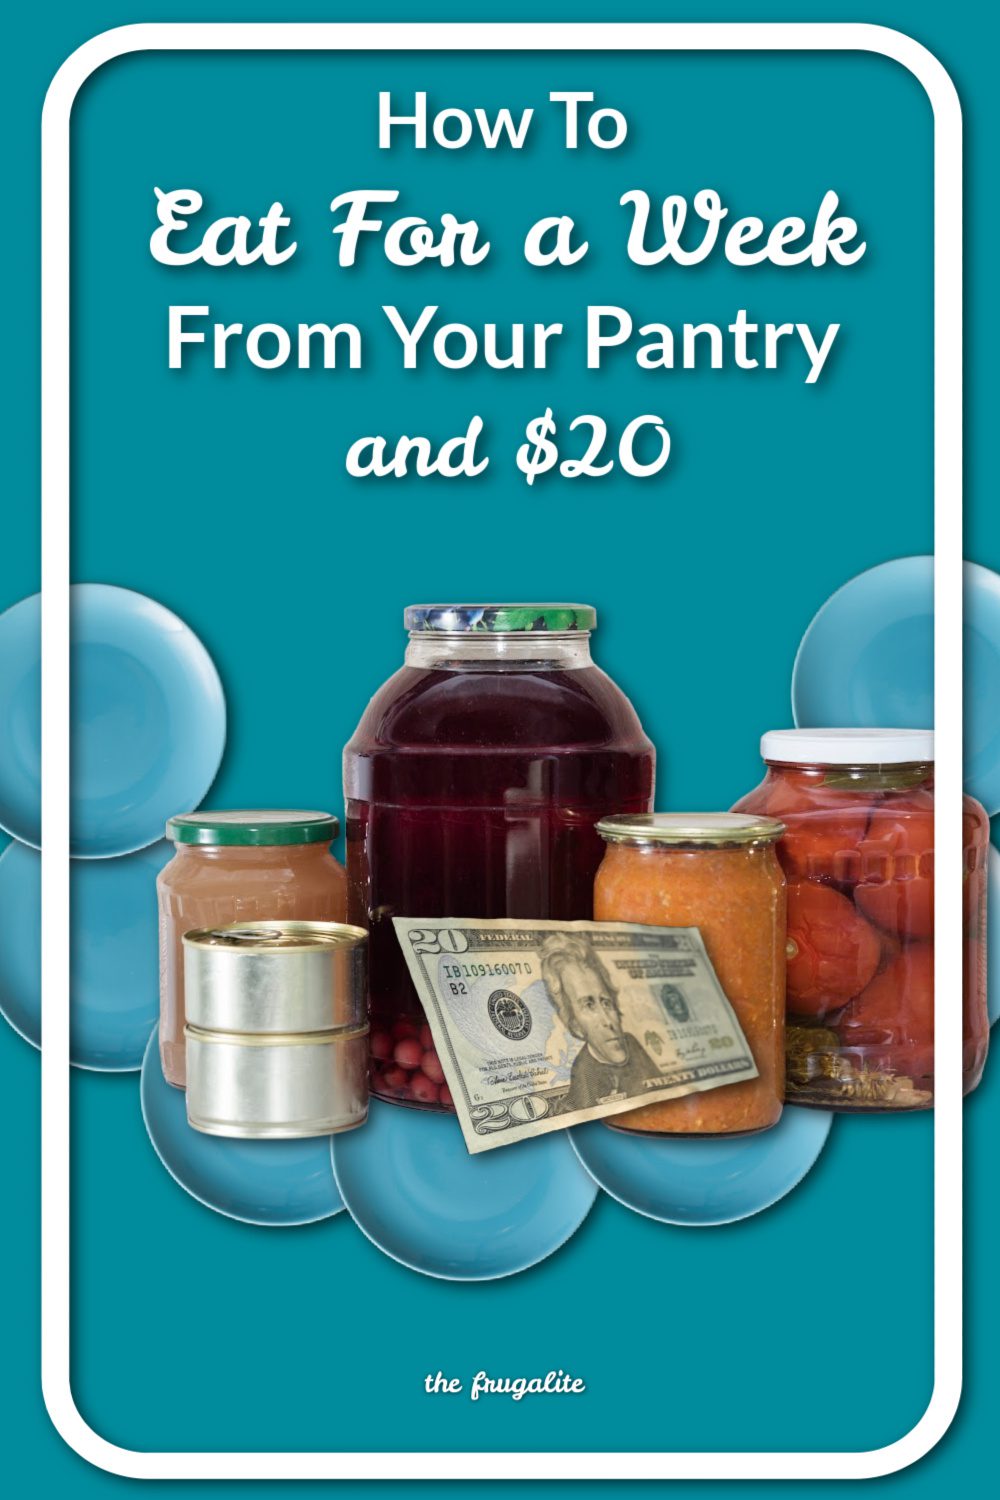 How To Eat For a Week From Your Pantry and $20